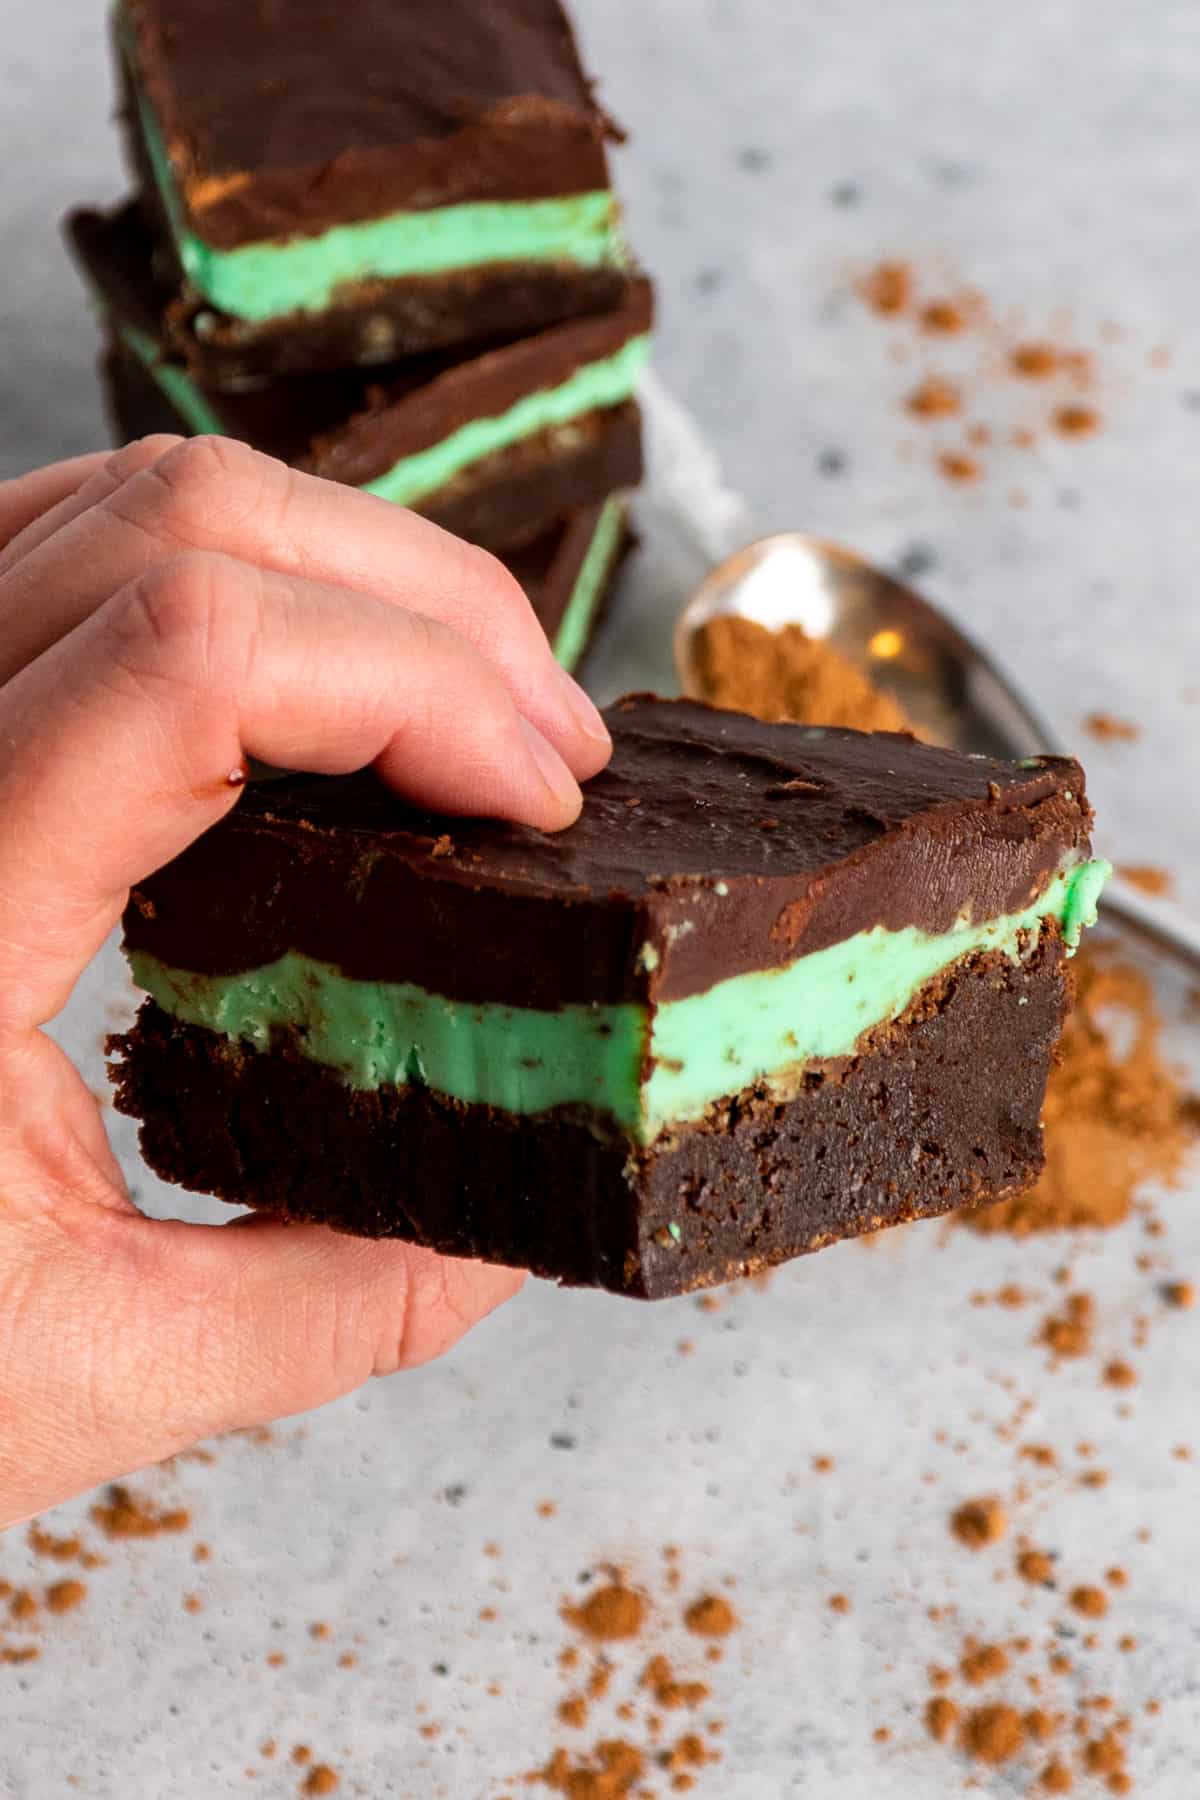 A hand holding a mint chocolate brownie.